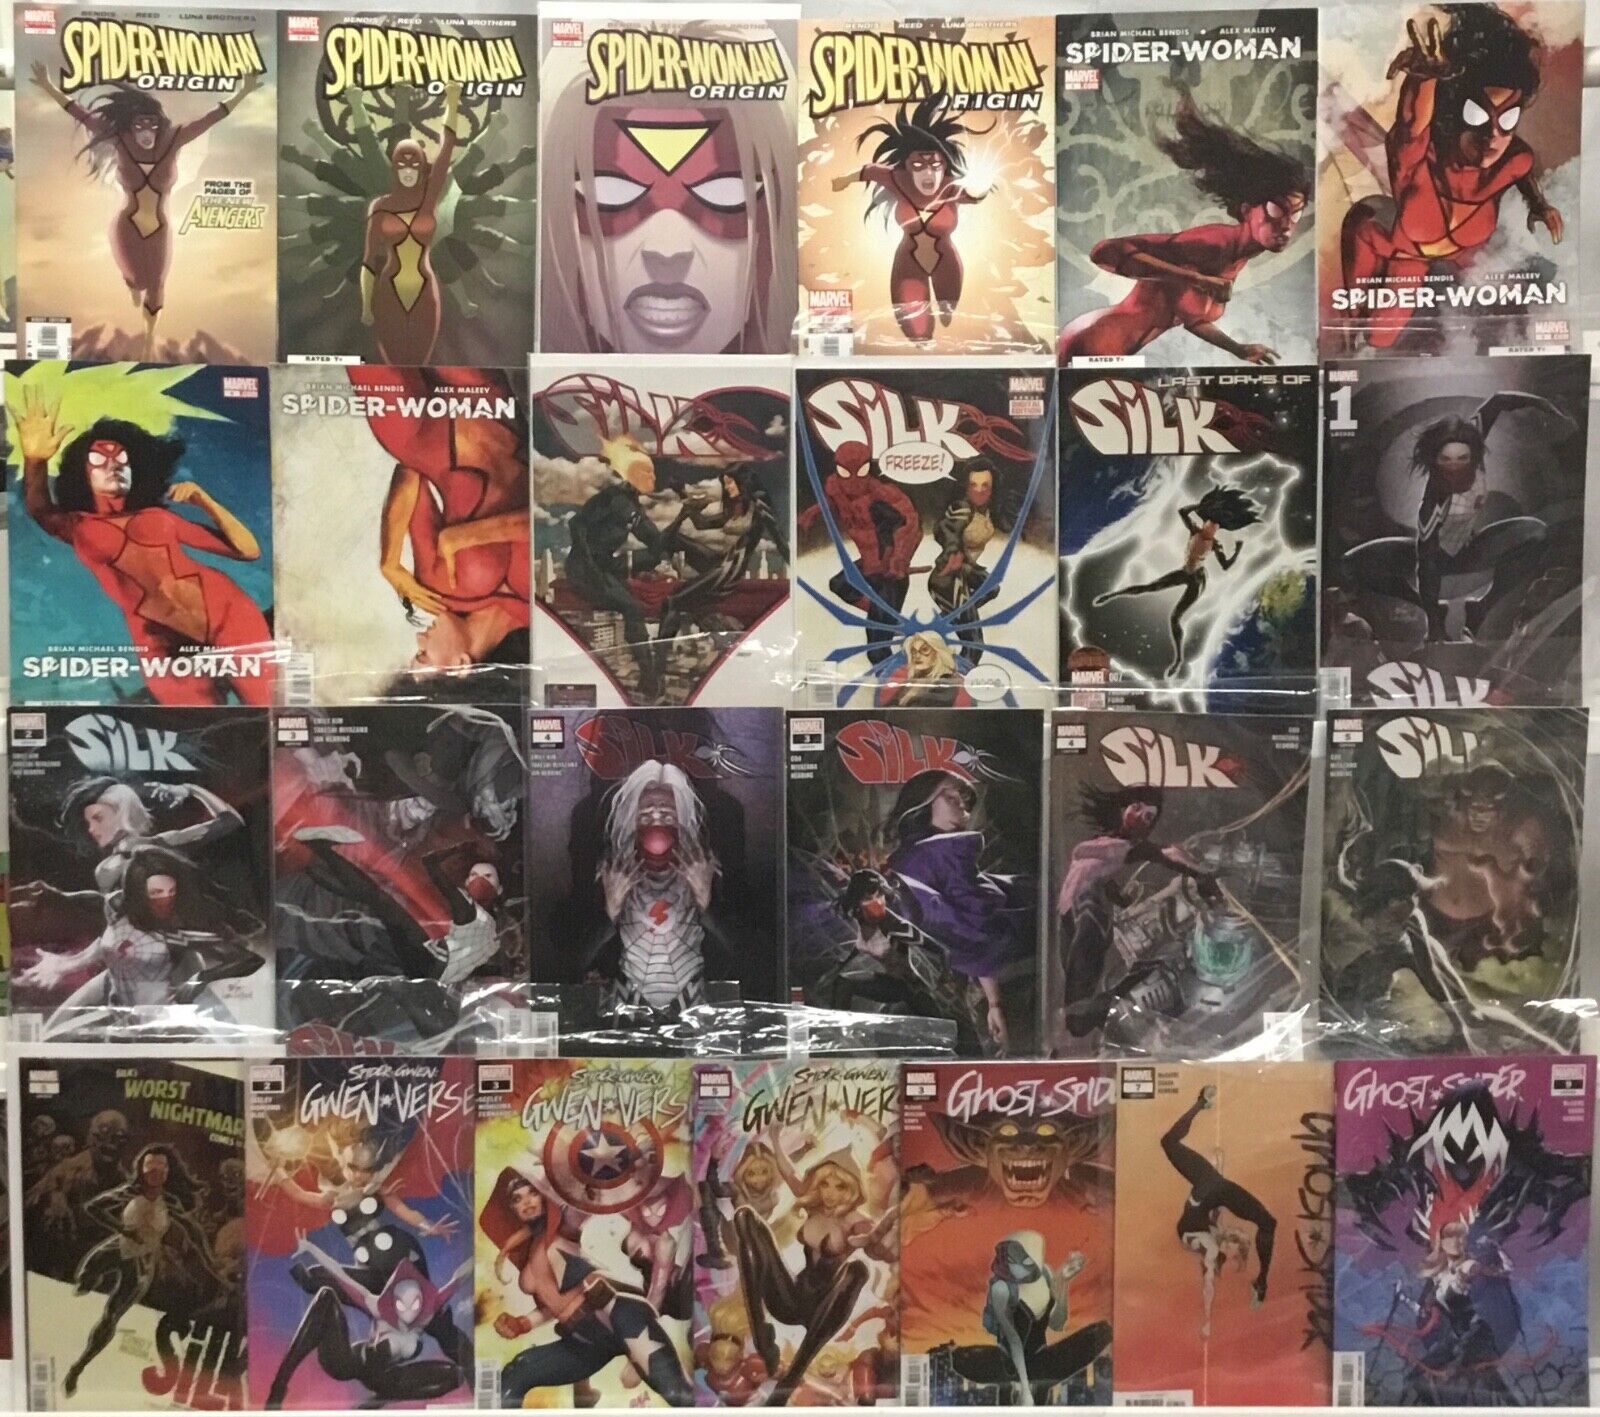 Marvel Comics - Spider-Woman / Silk / Spider-Gwen - Comic Book Lot of 25 Issues